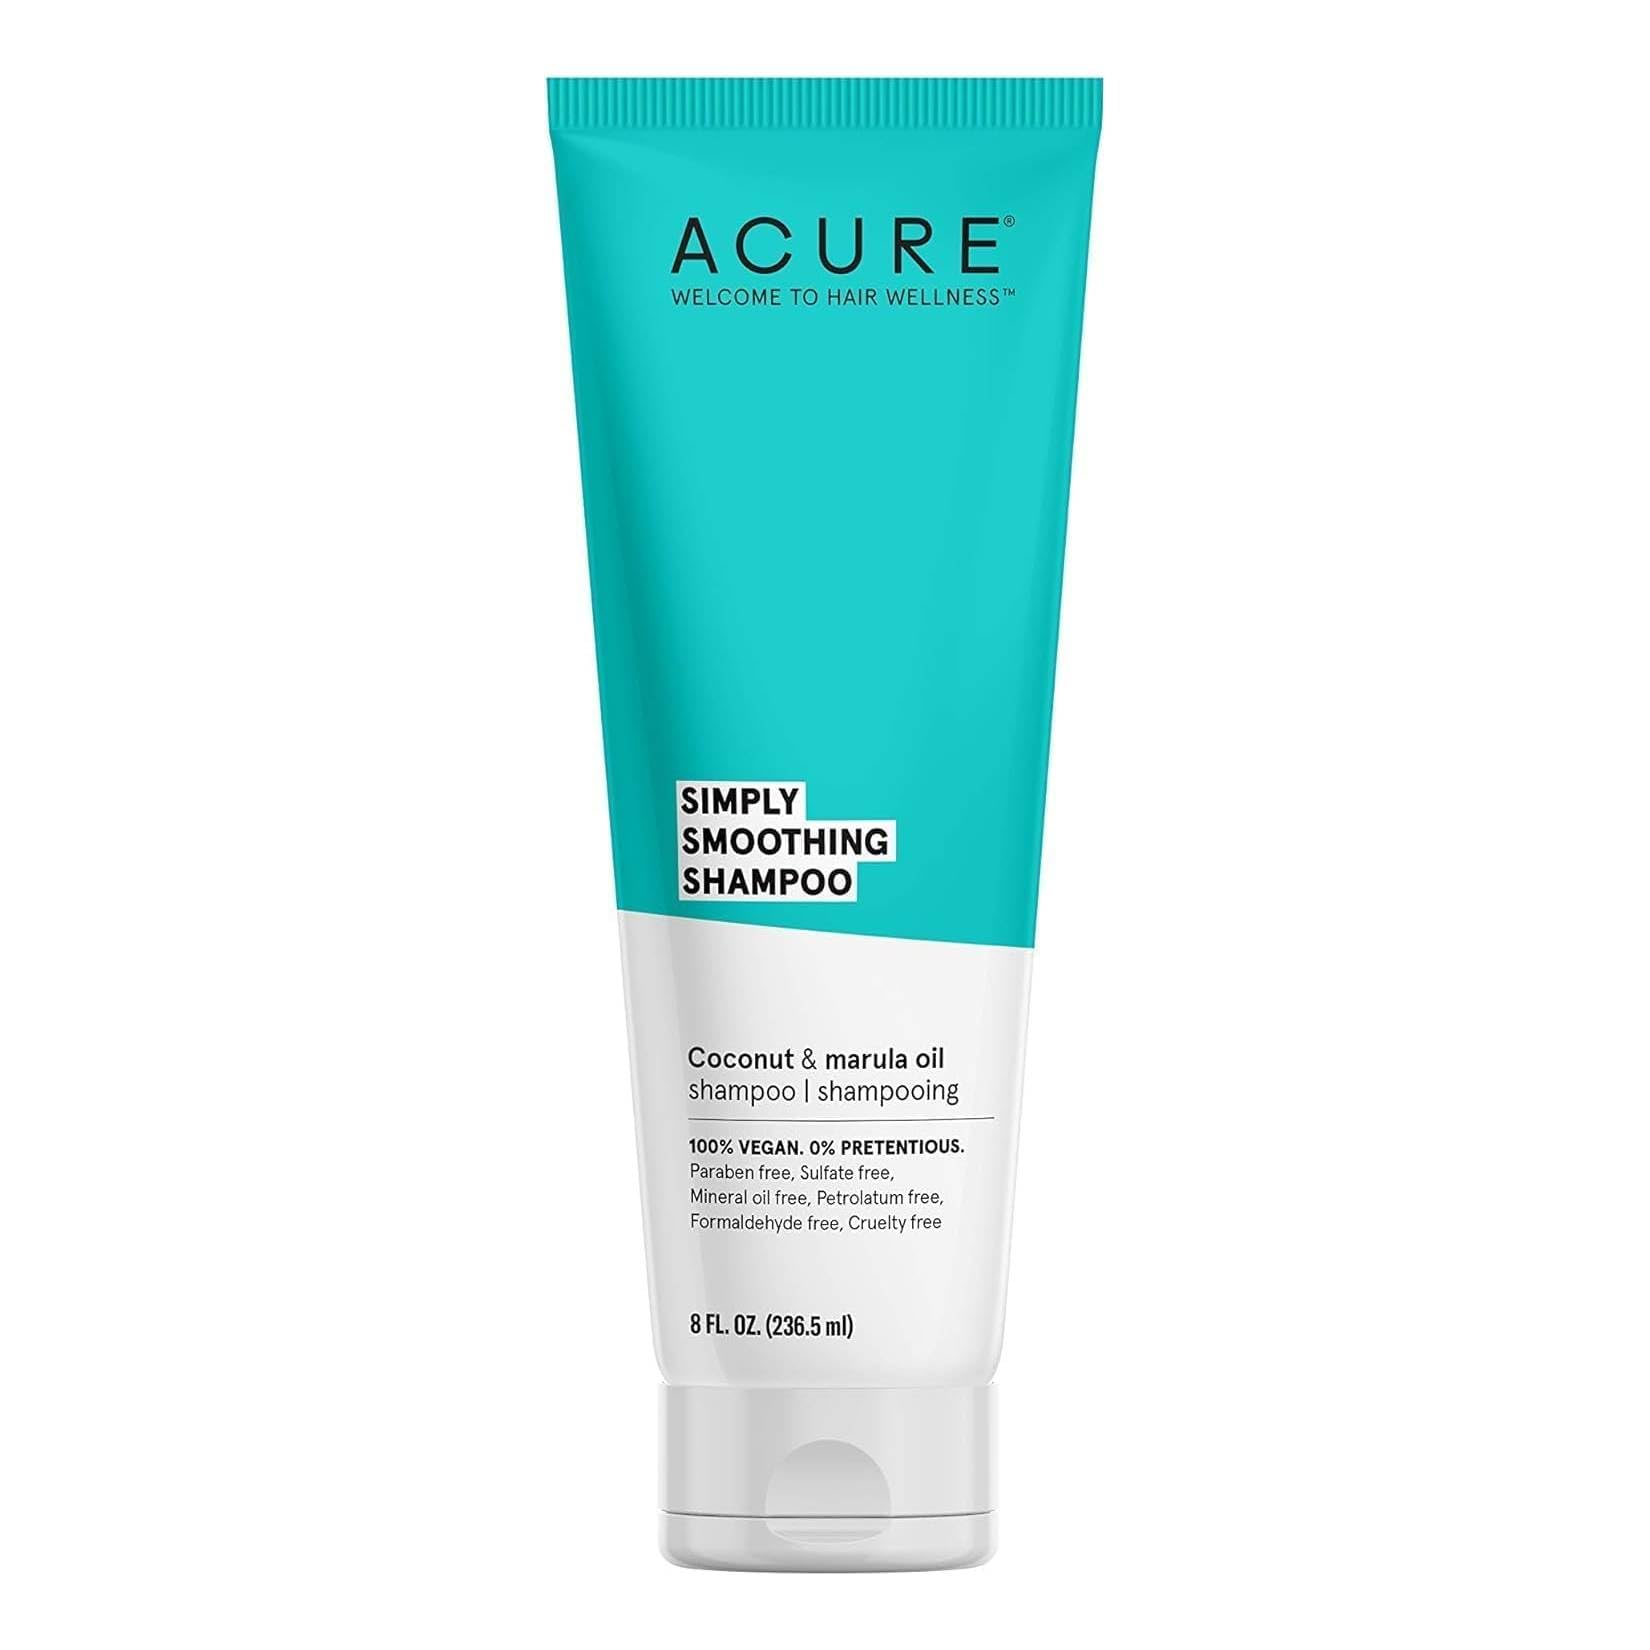 Acure Shampoo Simply Smoothing Coconut 236ml